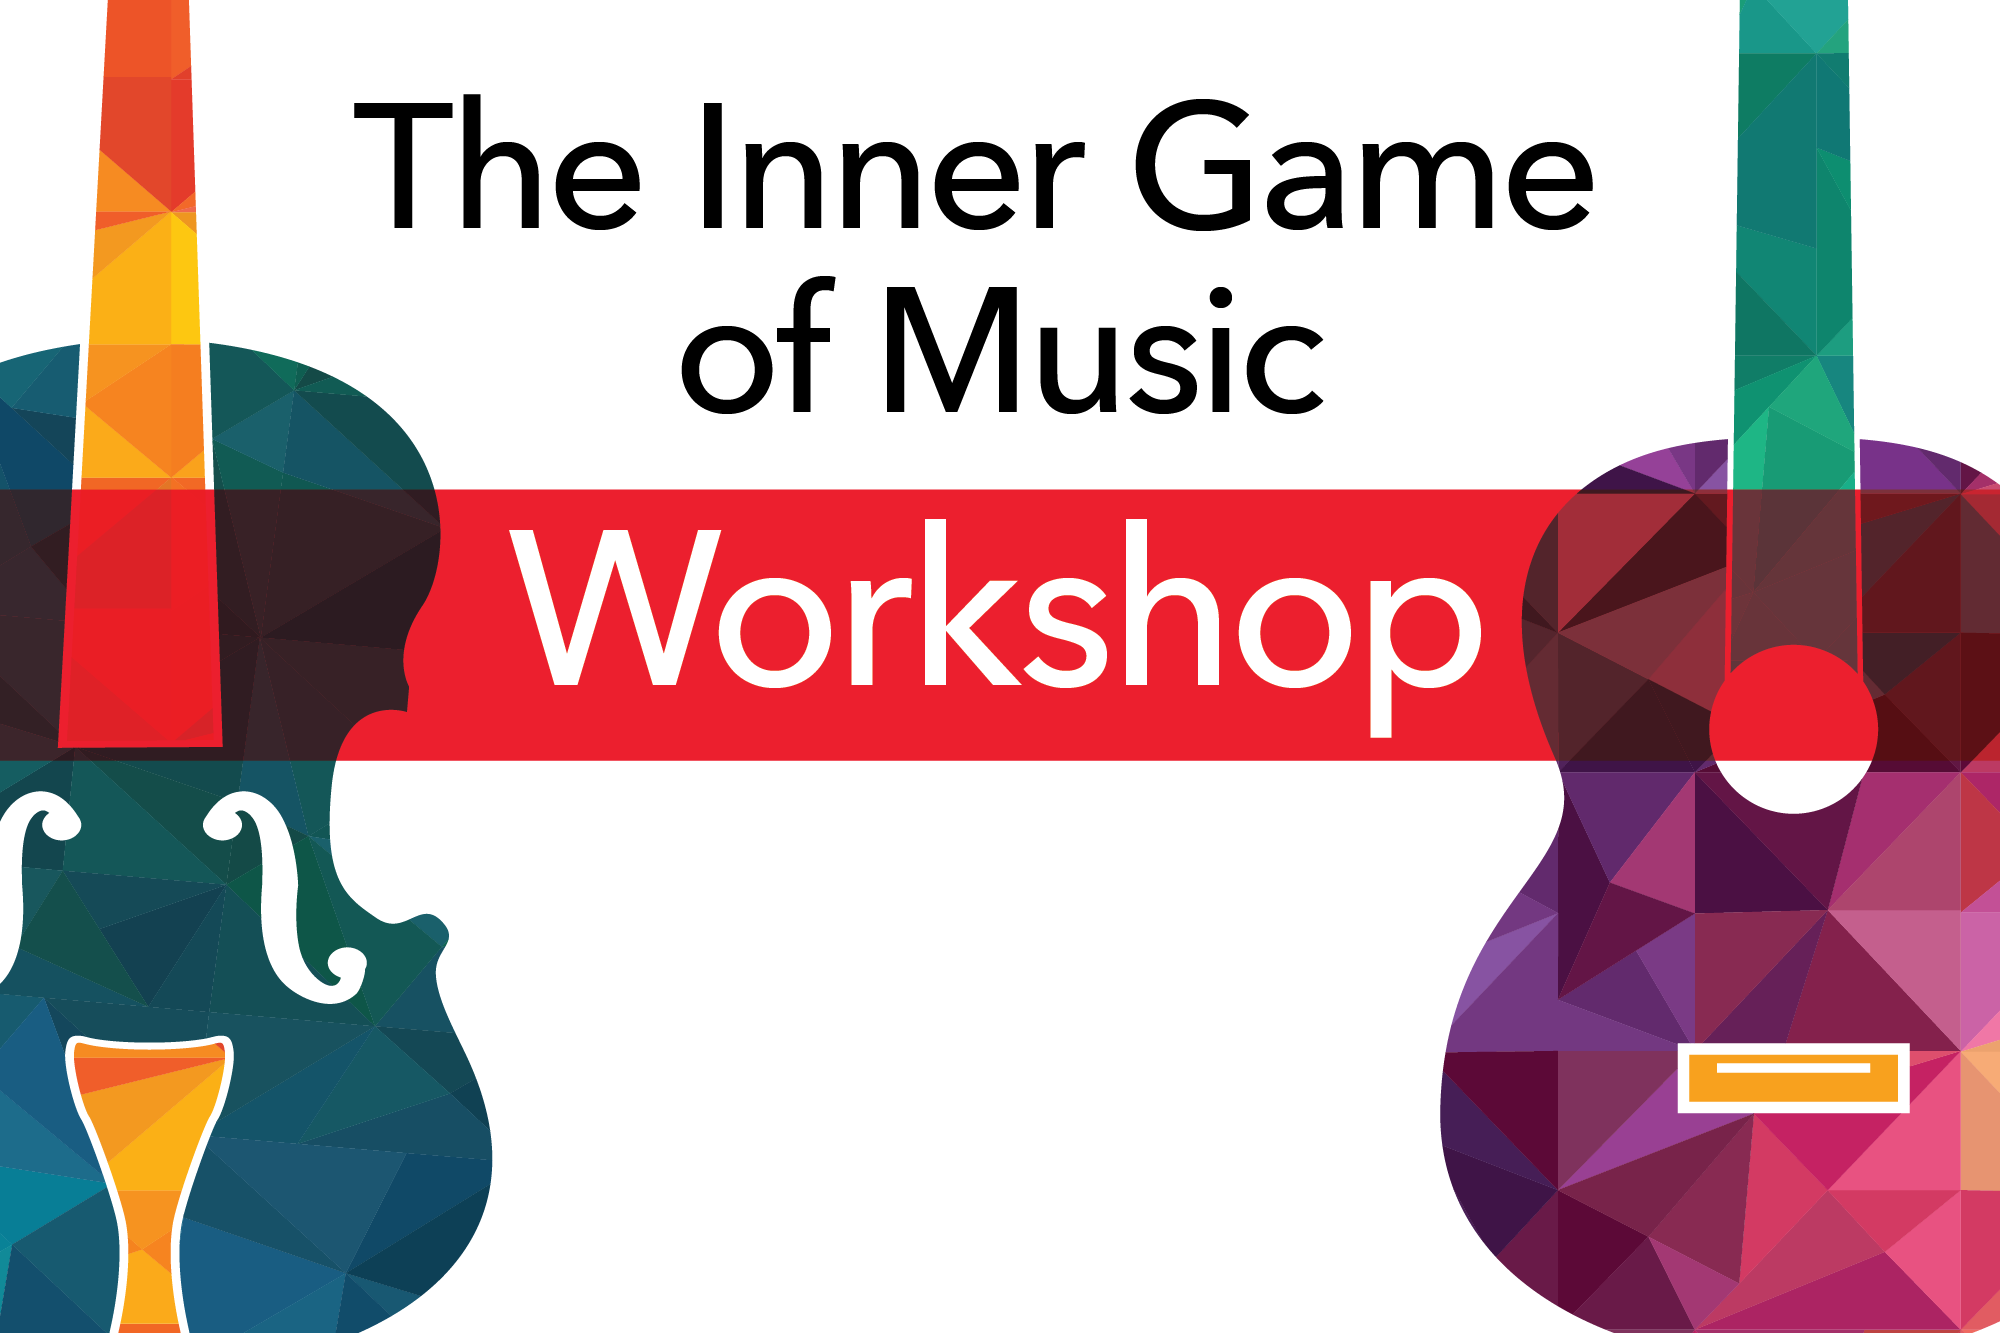 Image for "inner Game of Music" press release.